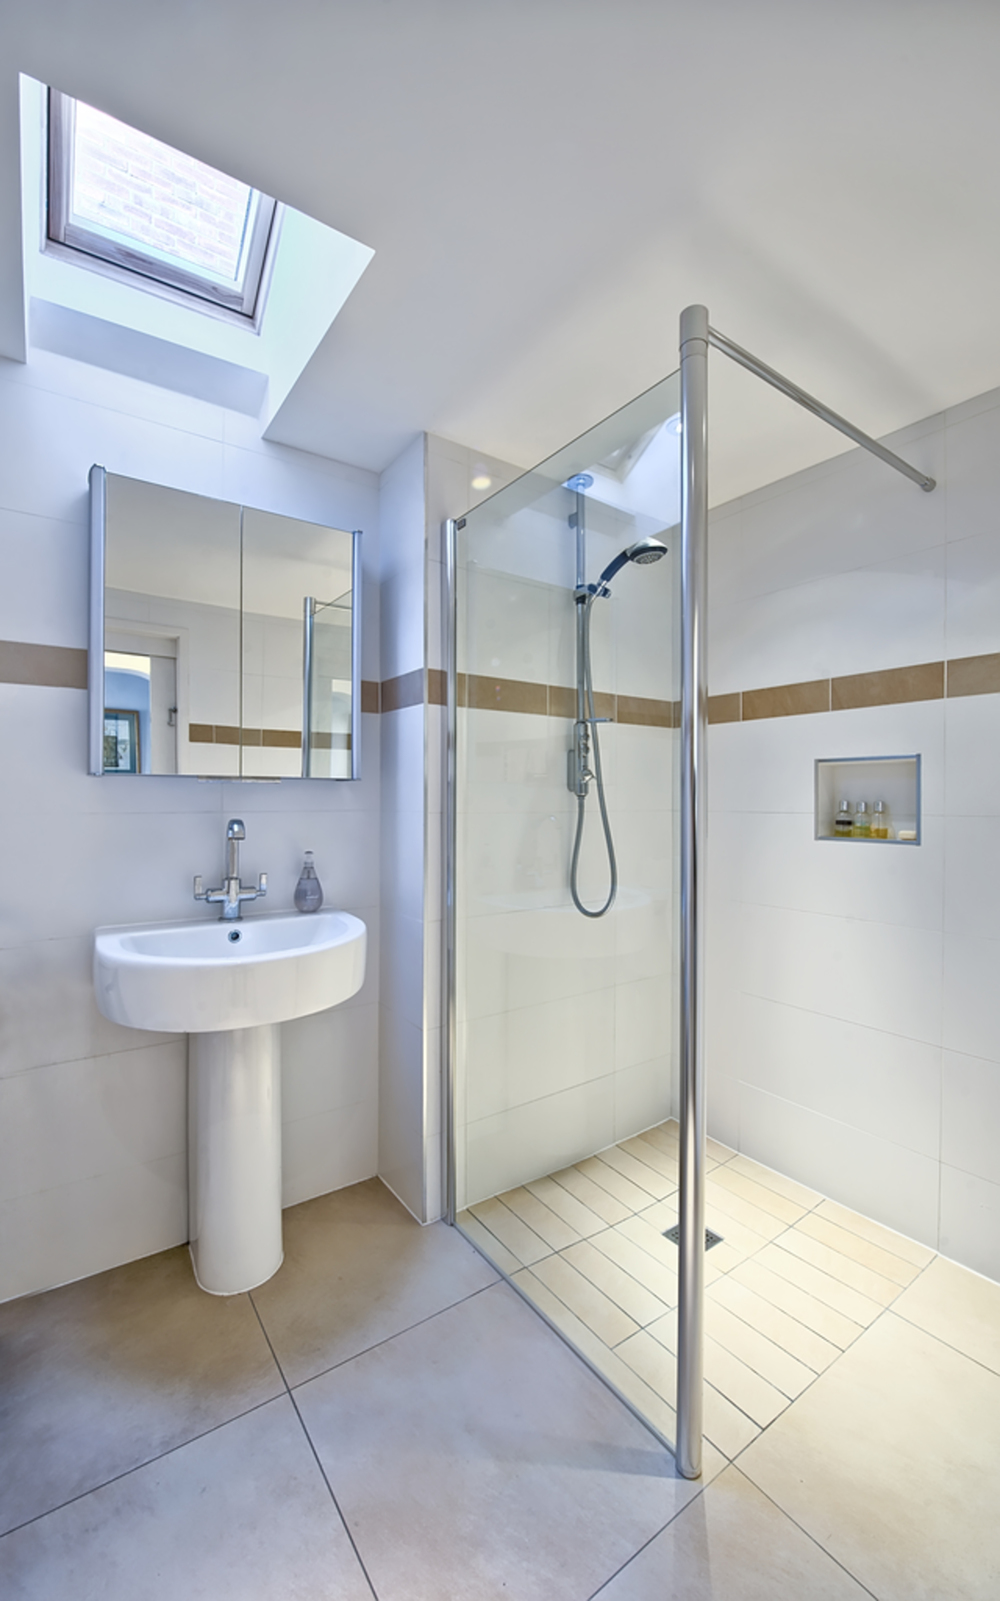 Modern bathroom shower of a house extension by Harvey Norman Architects Cambridge